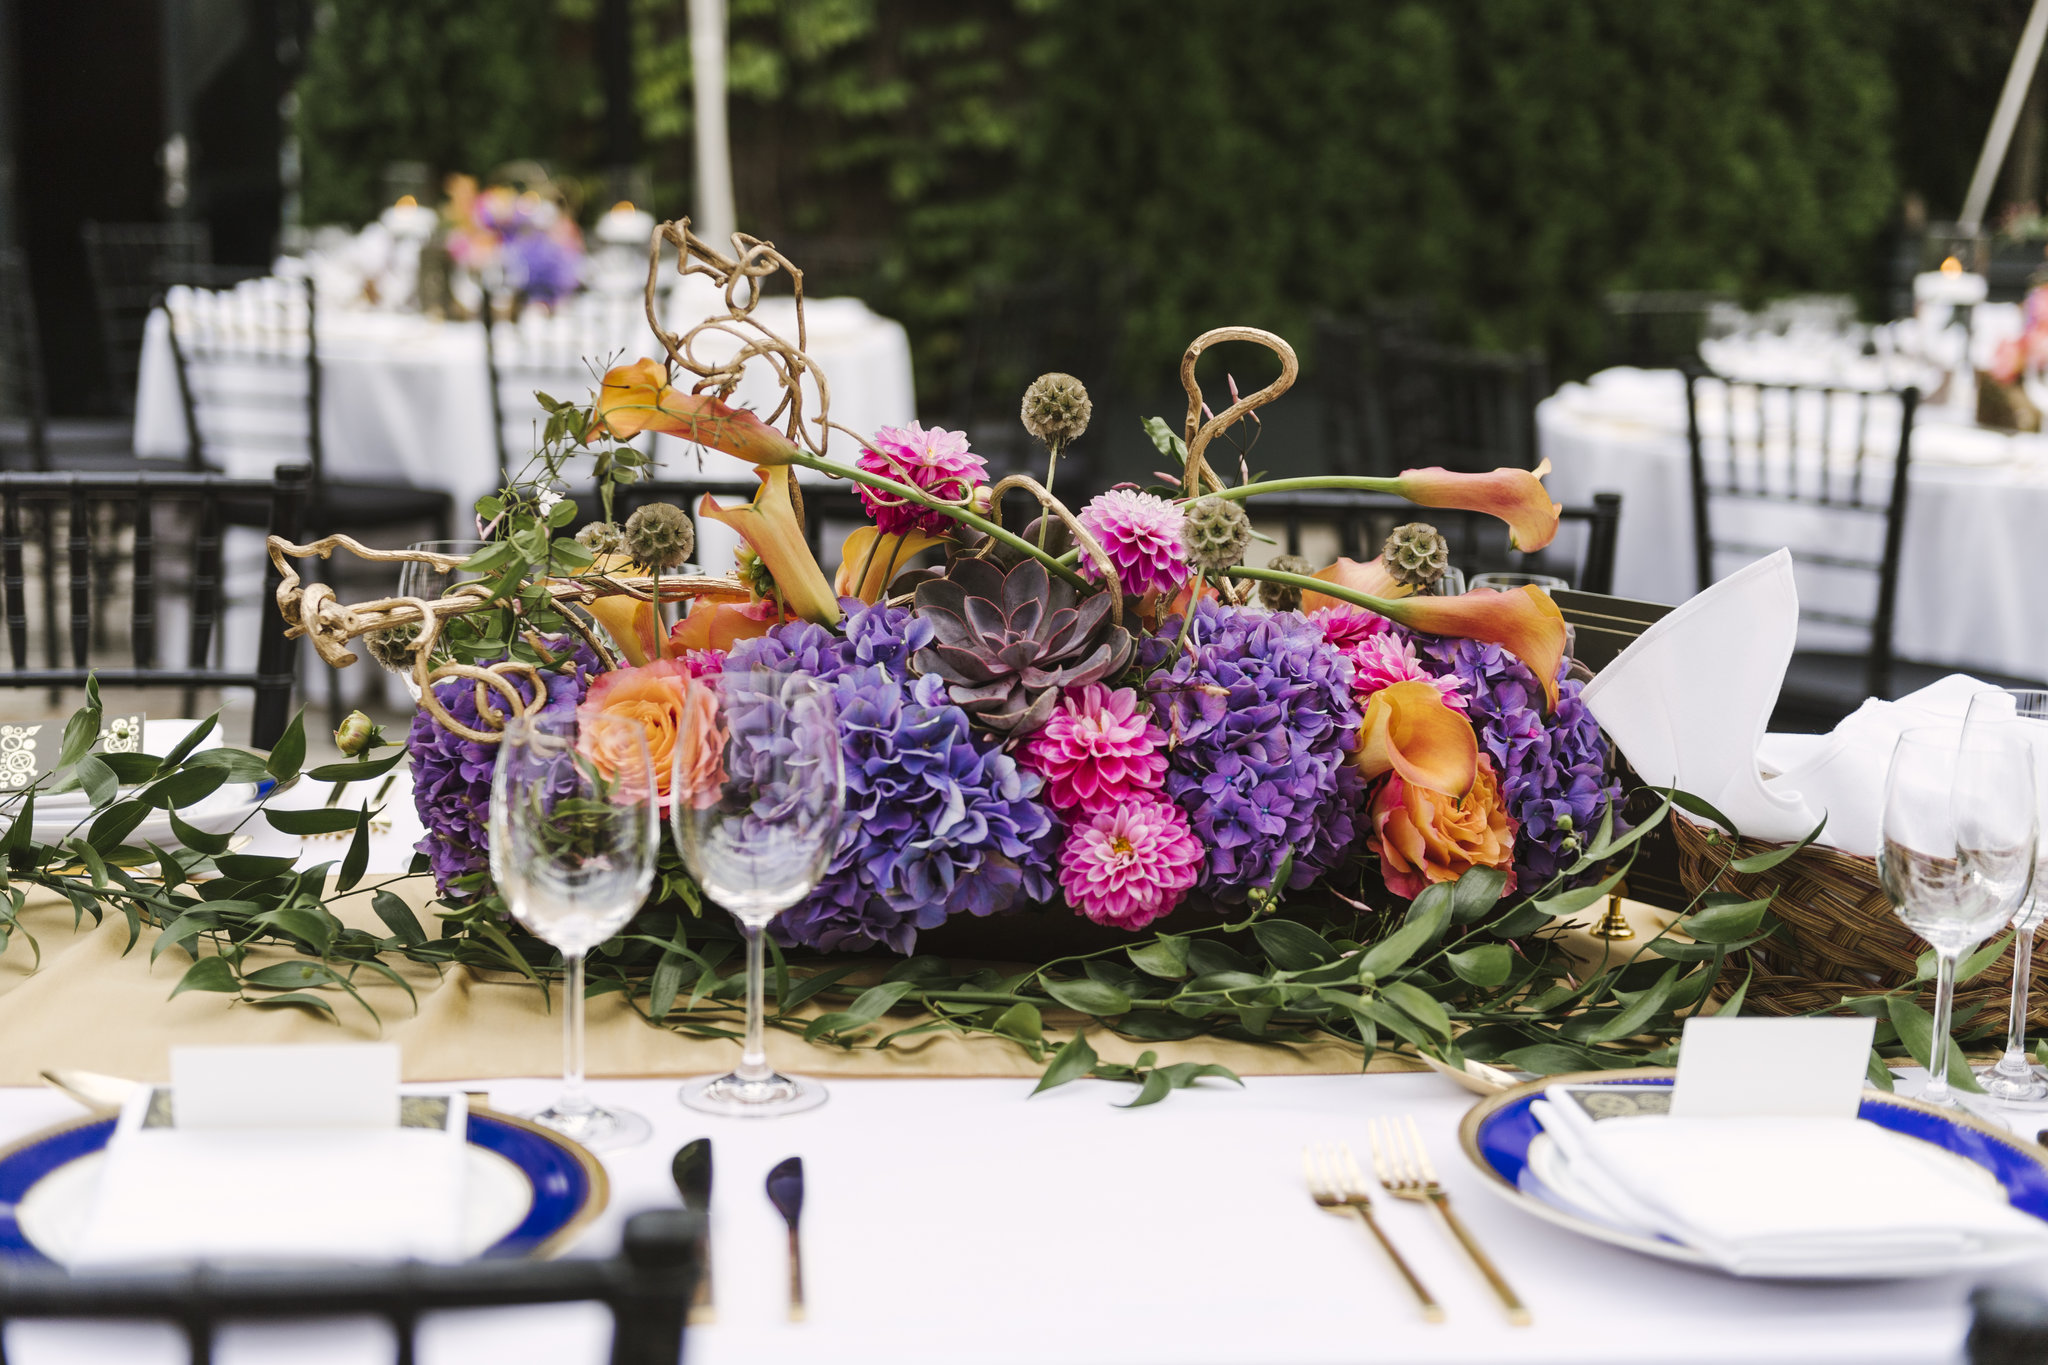  Photography:  Alicia King Photography   Planning:  Color Pop Events   Venue:  The Foundry  